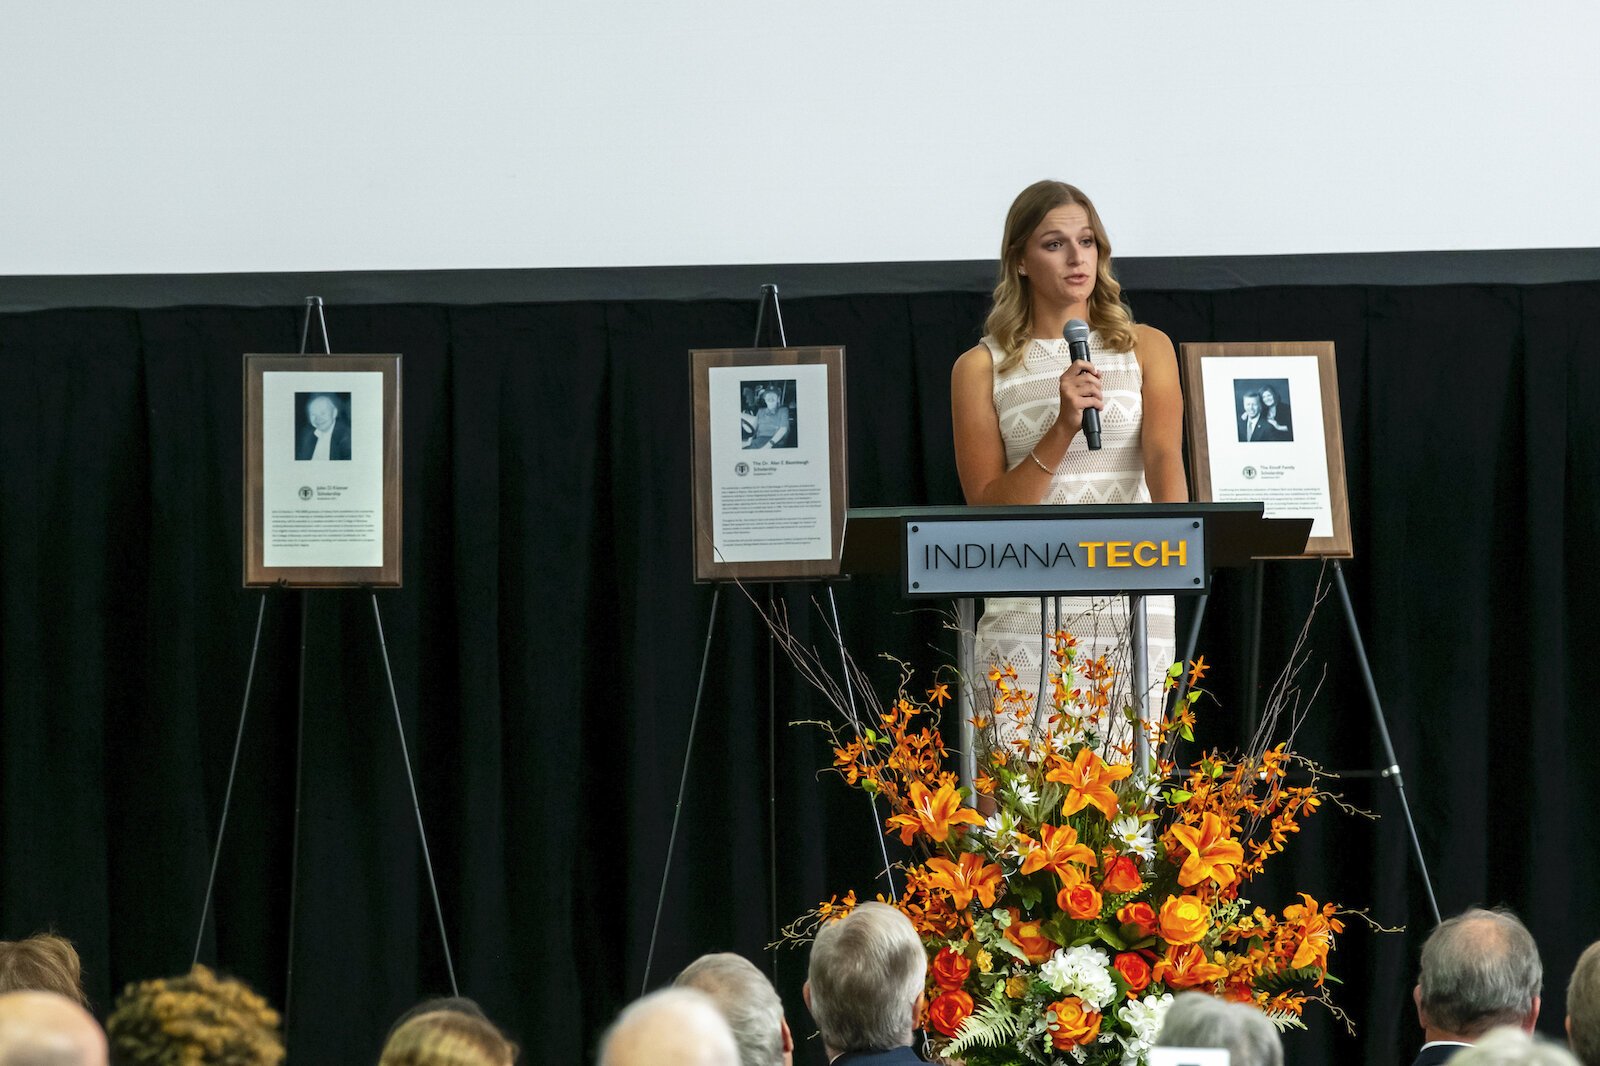 Biomedical engineering major Julia Bockstahler speaks at the President’s Dinner during Indiana Tech’s 2021 homecoming. The Oak Forest, Illinois, native is also a member of Indiana Tech’s women’s golf team.